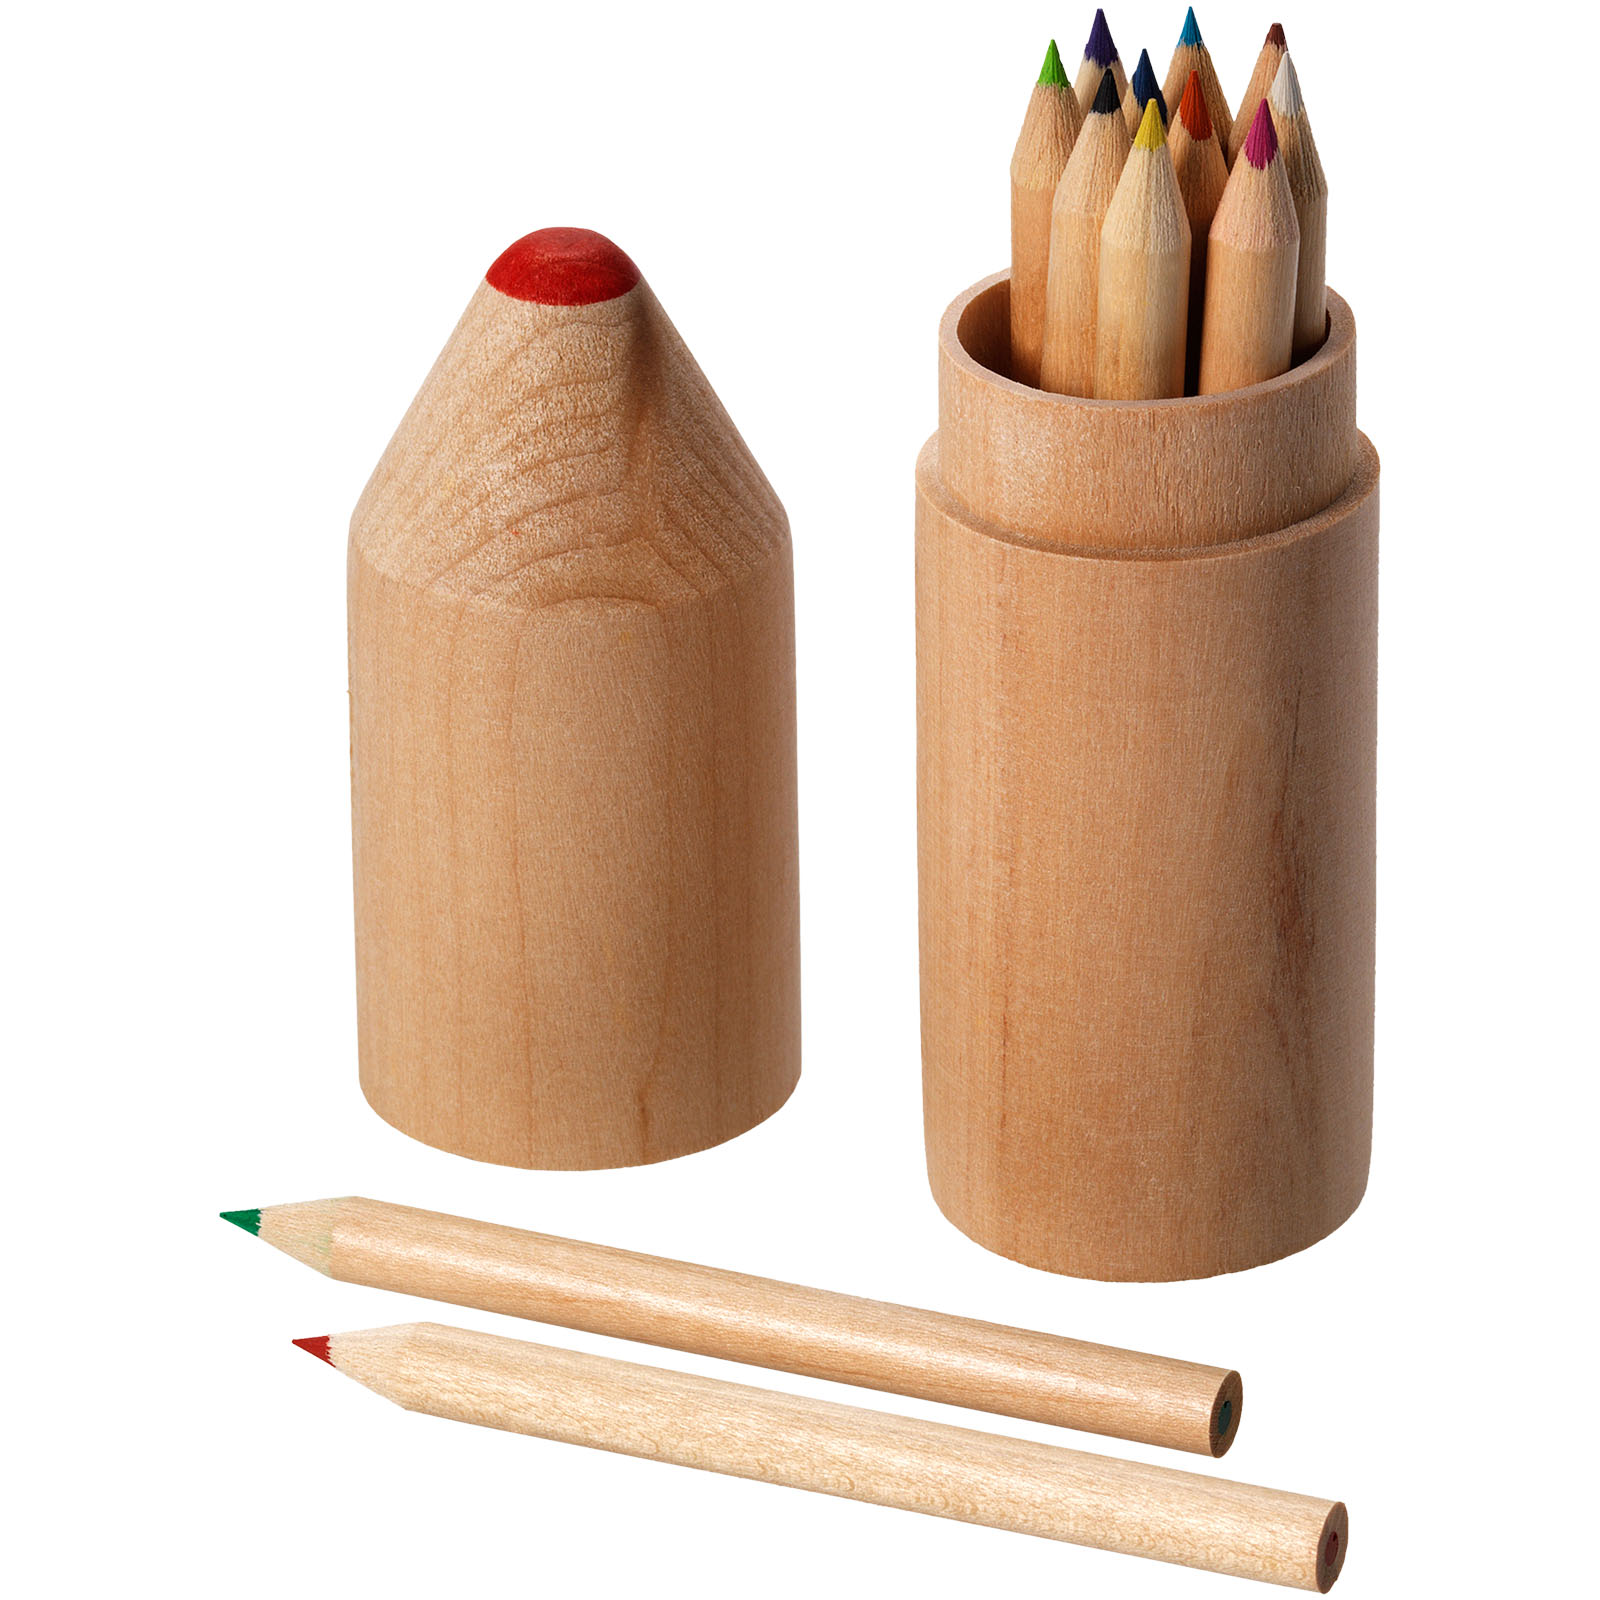 Coloured Pencils in Wooden Pencil-Shaped Box - Uttoxeter